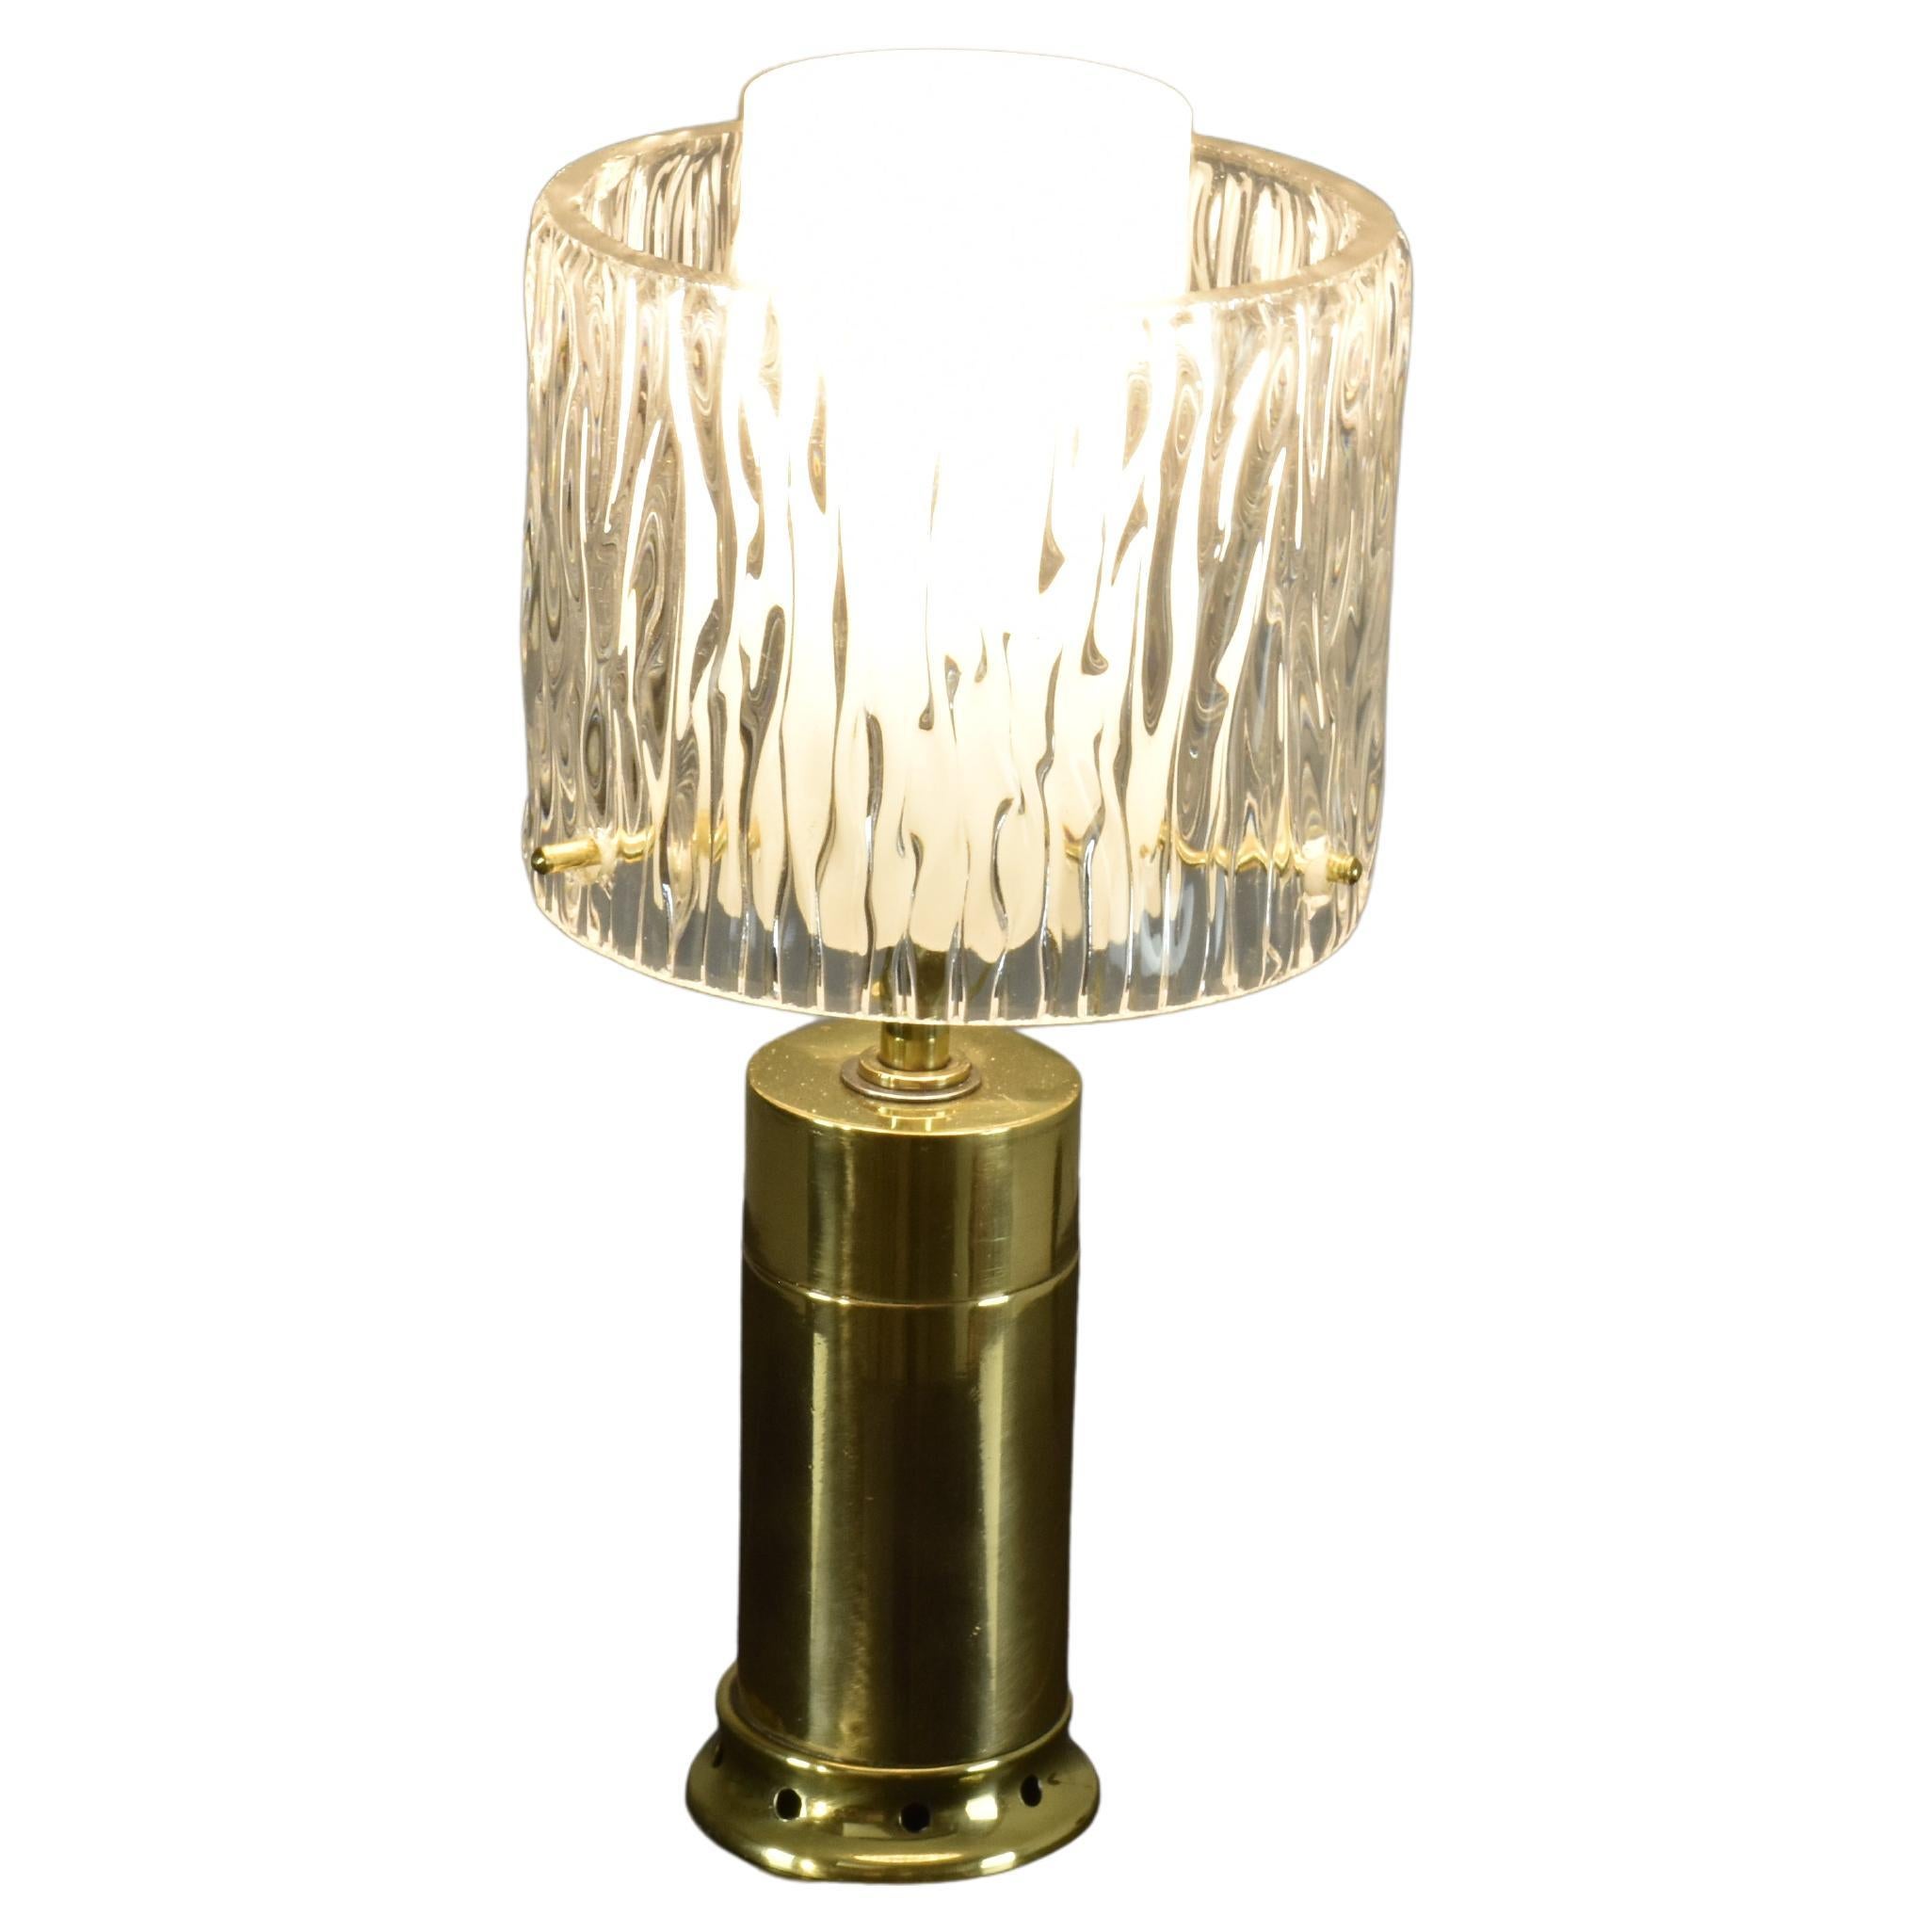 A beautiful funky Italian table lamp from the 1970s designed with a sleek brass base and a double cylinder-shaped shade. The inside shade is taller and in milk glass, and the outside glass shade is in beautiful textured glass. A sophisticated brass